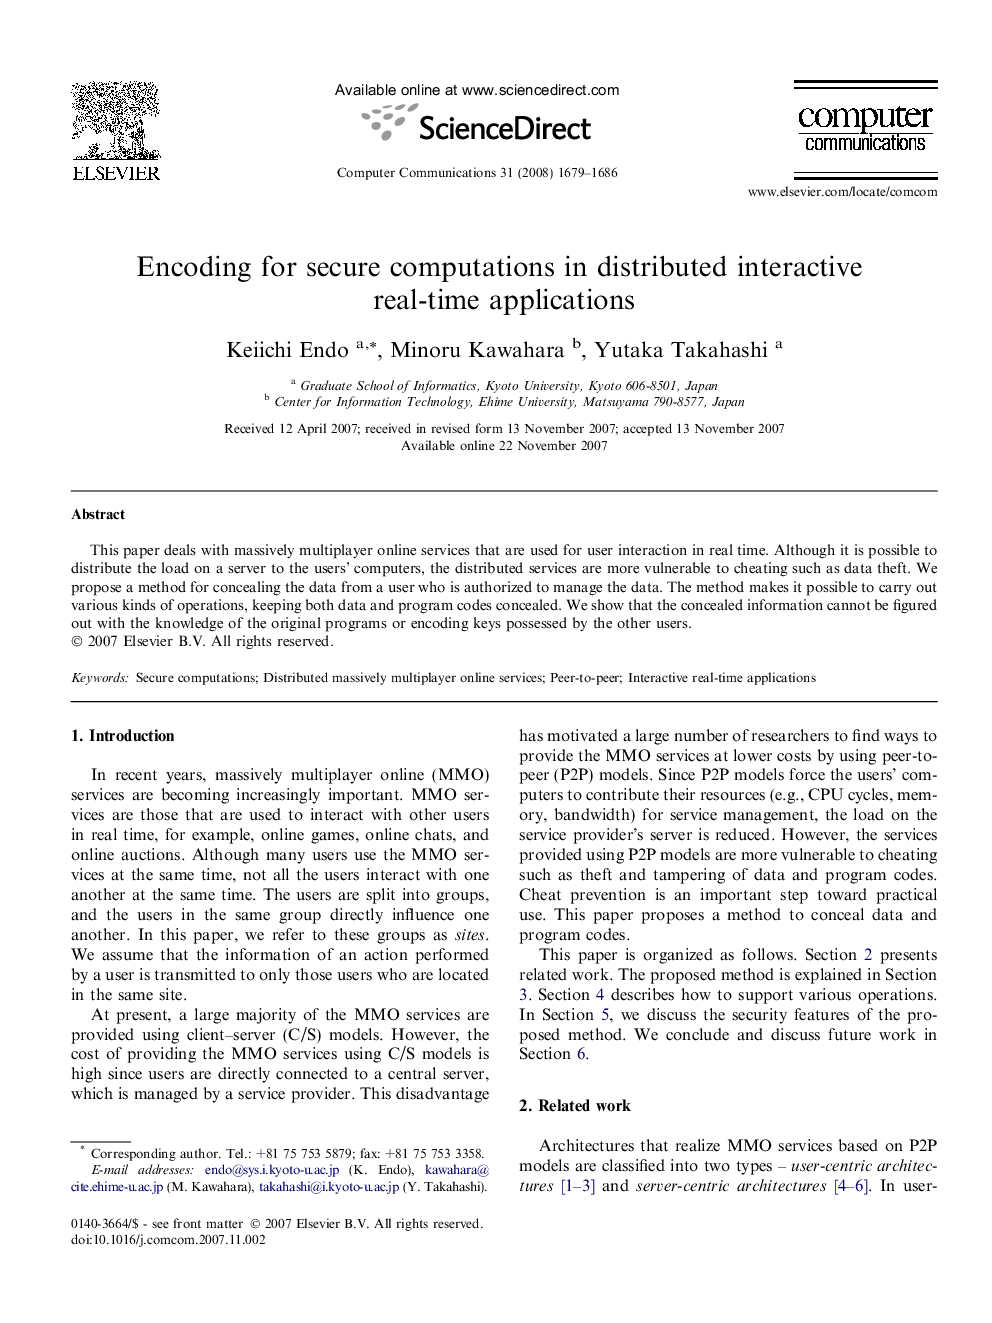 Encoding for secure computations in distributed interactive real-time applications